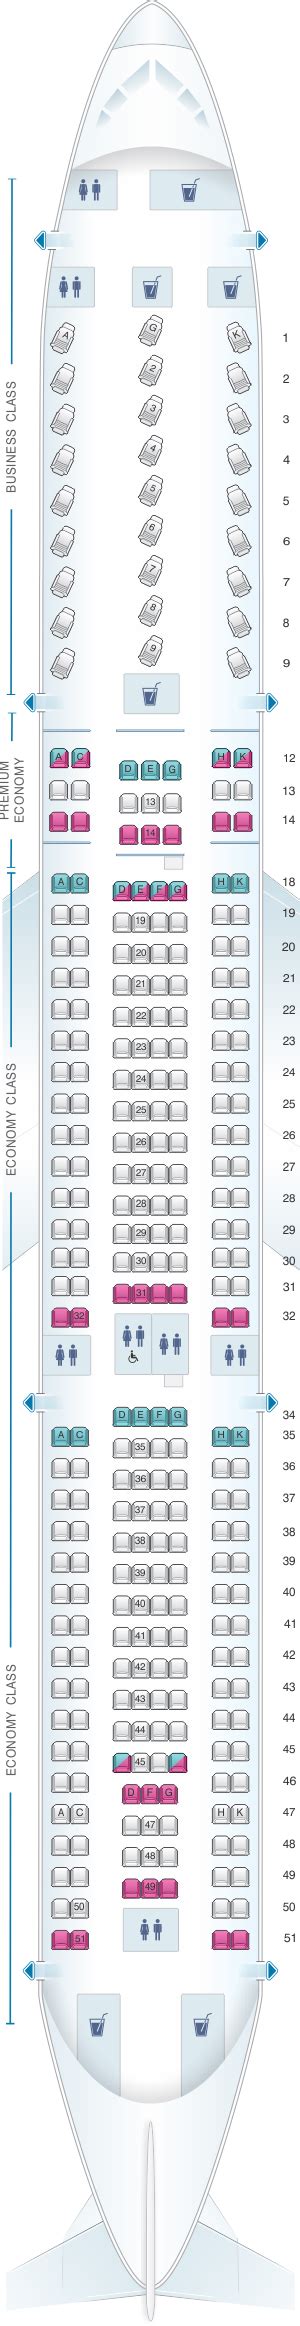 Airbus A330 300 Seating Plan Air Transat Two Birds Home